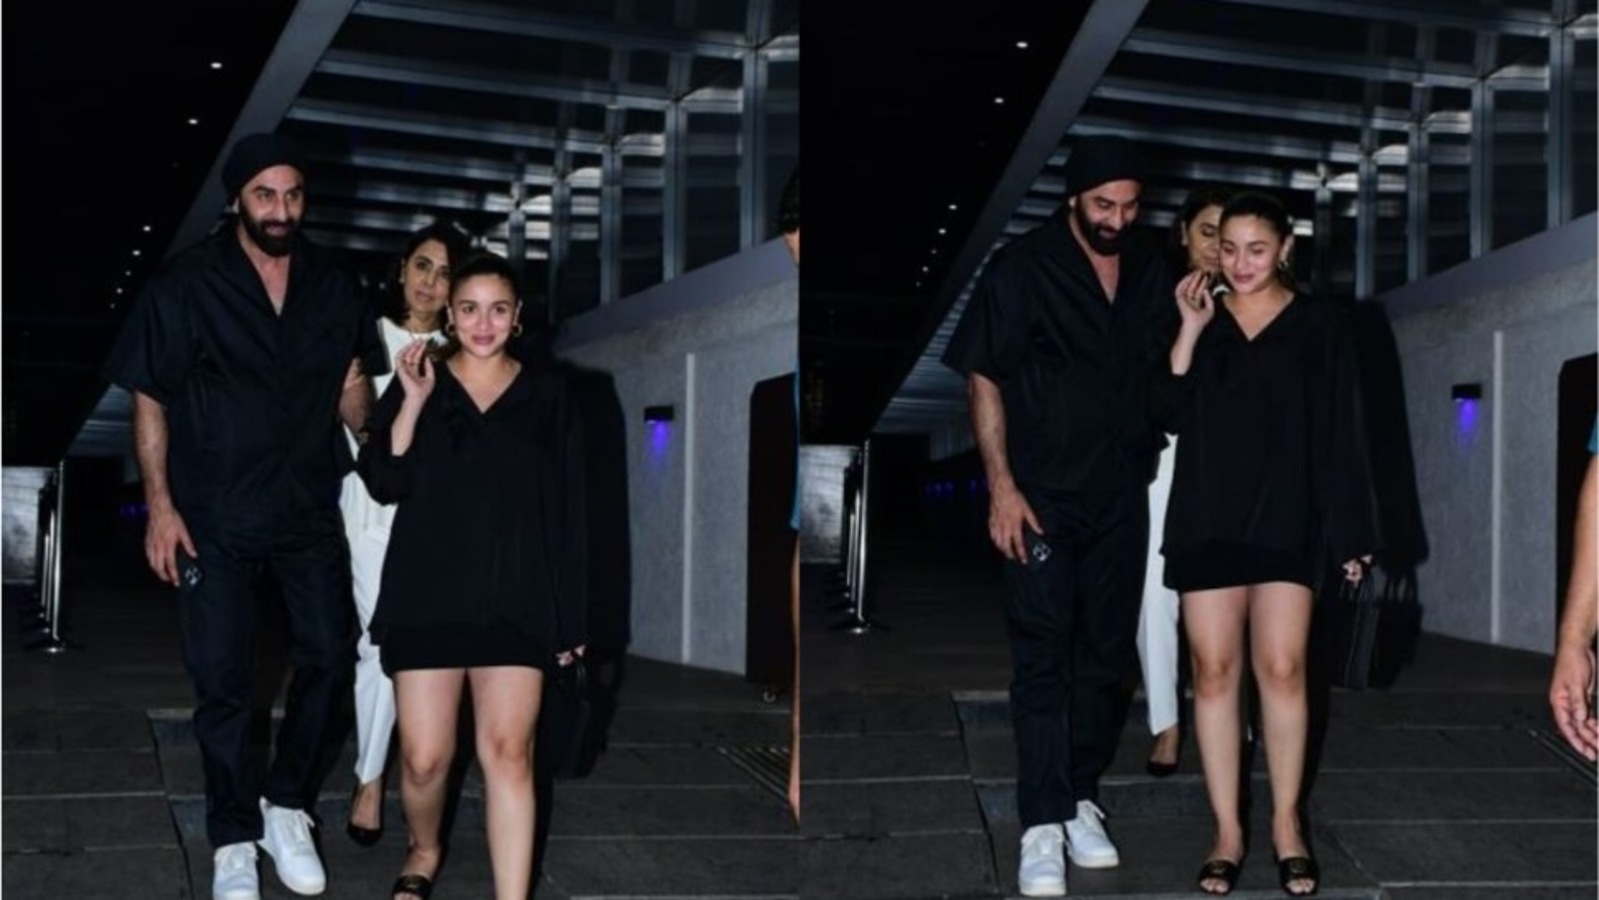 Alia Bhatt laughs, says ‘I’m fine’ after Neetu Kapoor tells Ranbir Kapoor to hold her while walking down stairs. Watch